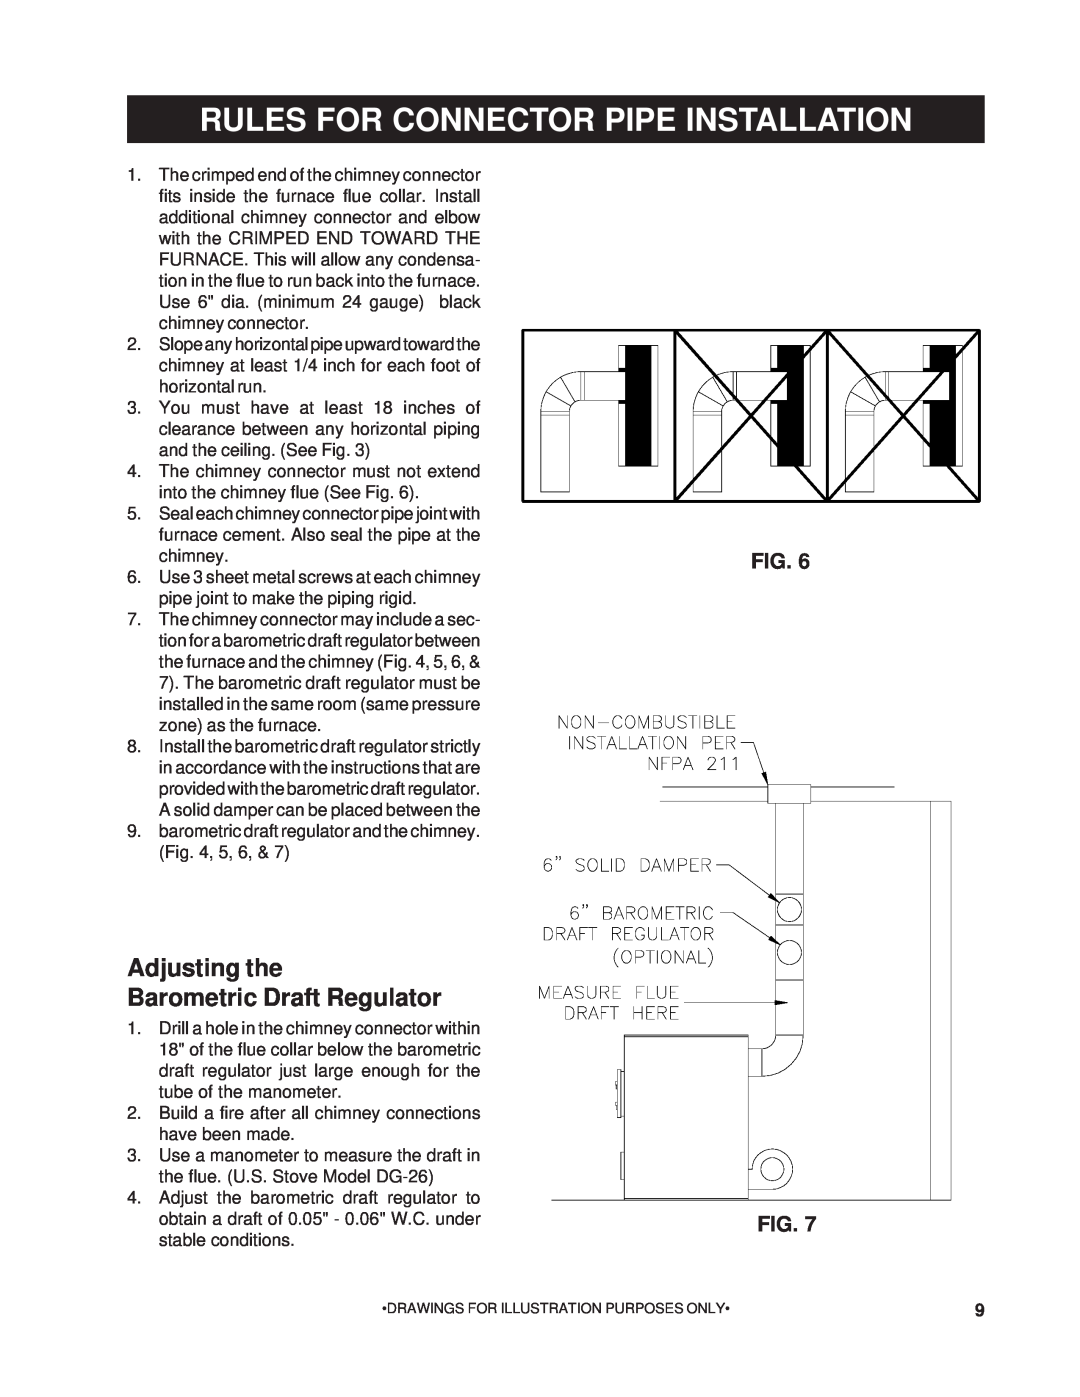 United States Stove 1200G Rules For Connector Pipe Installation, Adjusting the Barometric Draft Regulator, Fig. Fig 